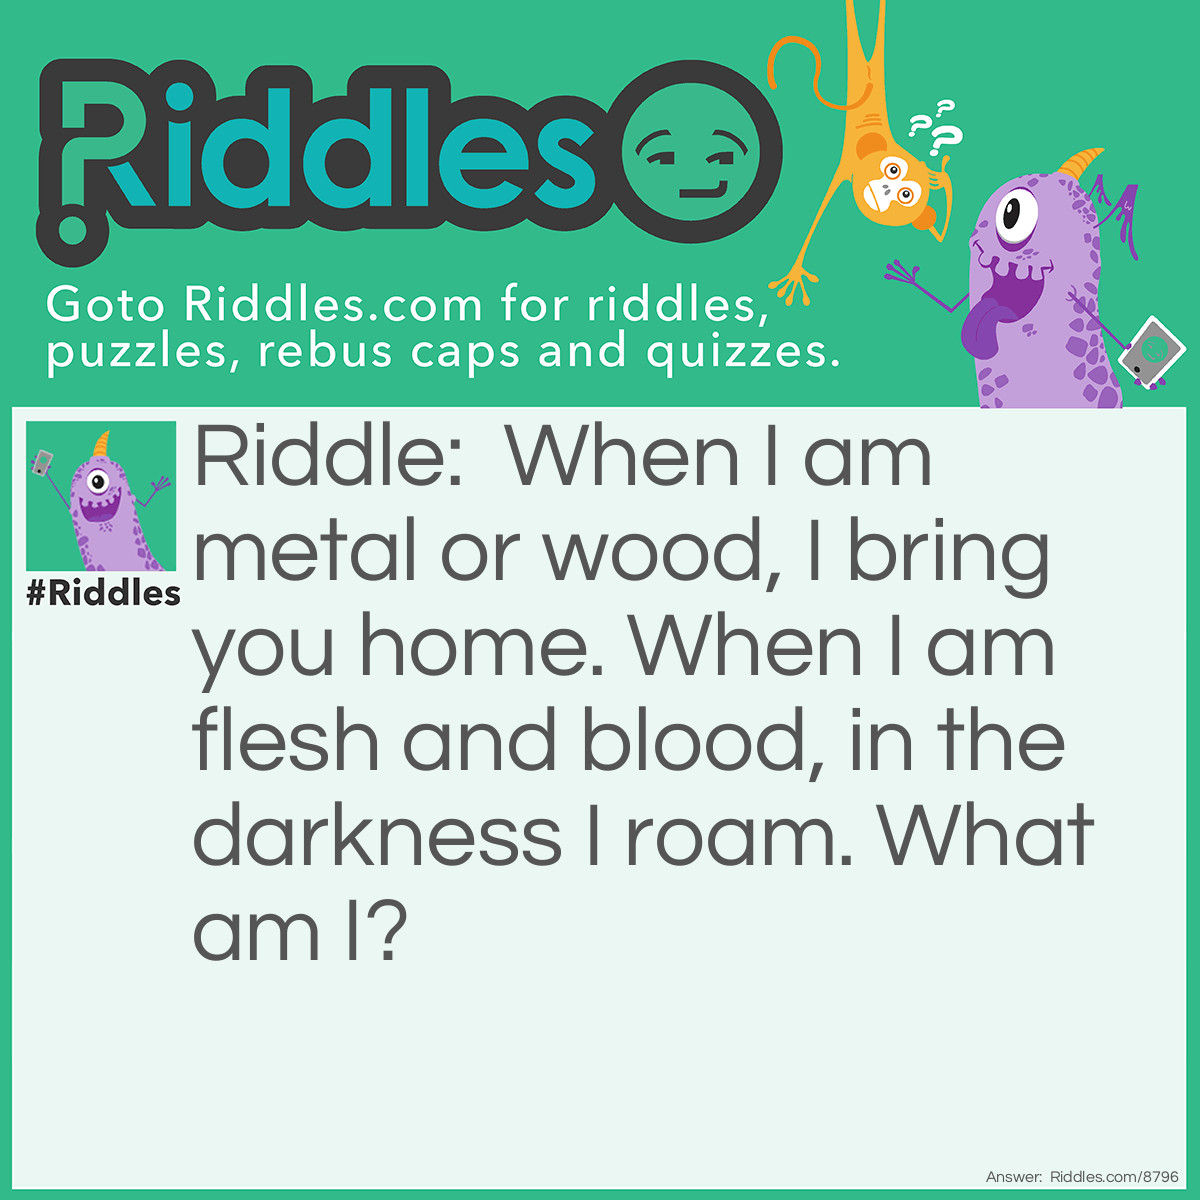 Riddle: When I am metal or wood, I bring you home. When I am flesh and blood, in the darkness I roam. What am I? Answer: A bat.